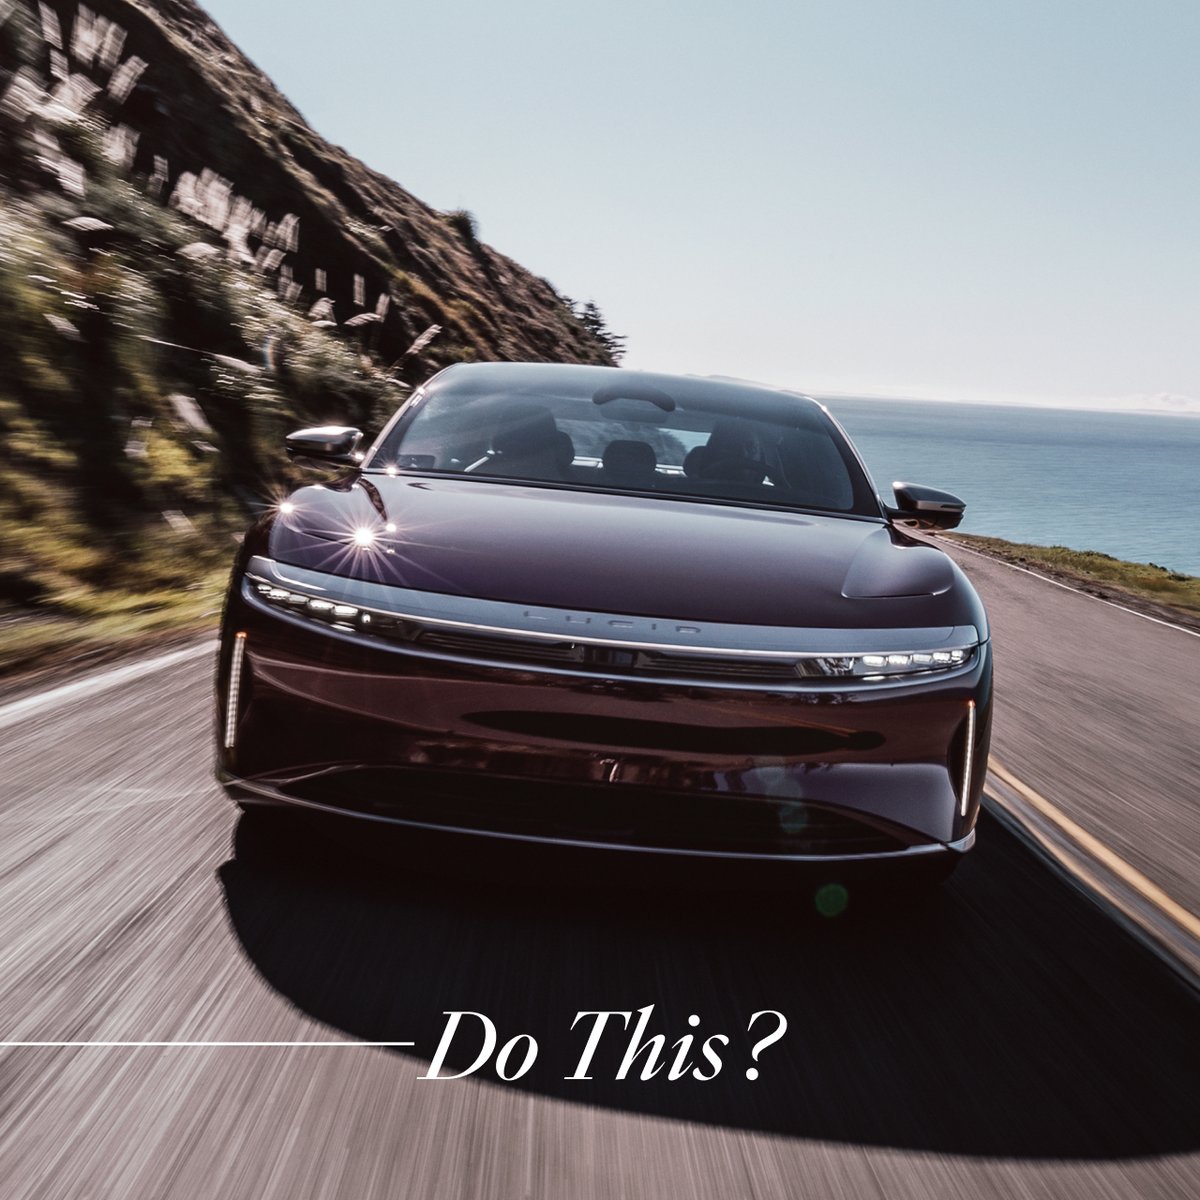 Wonder what it feels like to go from 0-60mph in 3 seconds? “Put your head back or the car will do it for you,” says Lucid Air Grand Touring owner, Harsha K. Activate Launch Mode on the Lucid Air to experience it for yourself. #CanYourCarDoThis? #LucidMotors
---
Extreme speeds…